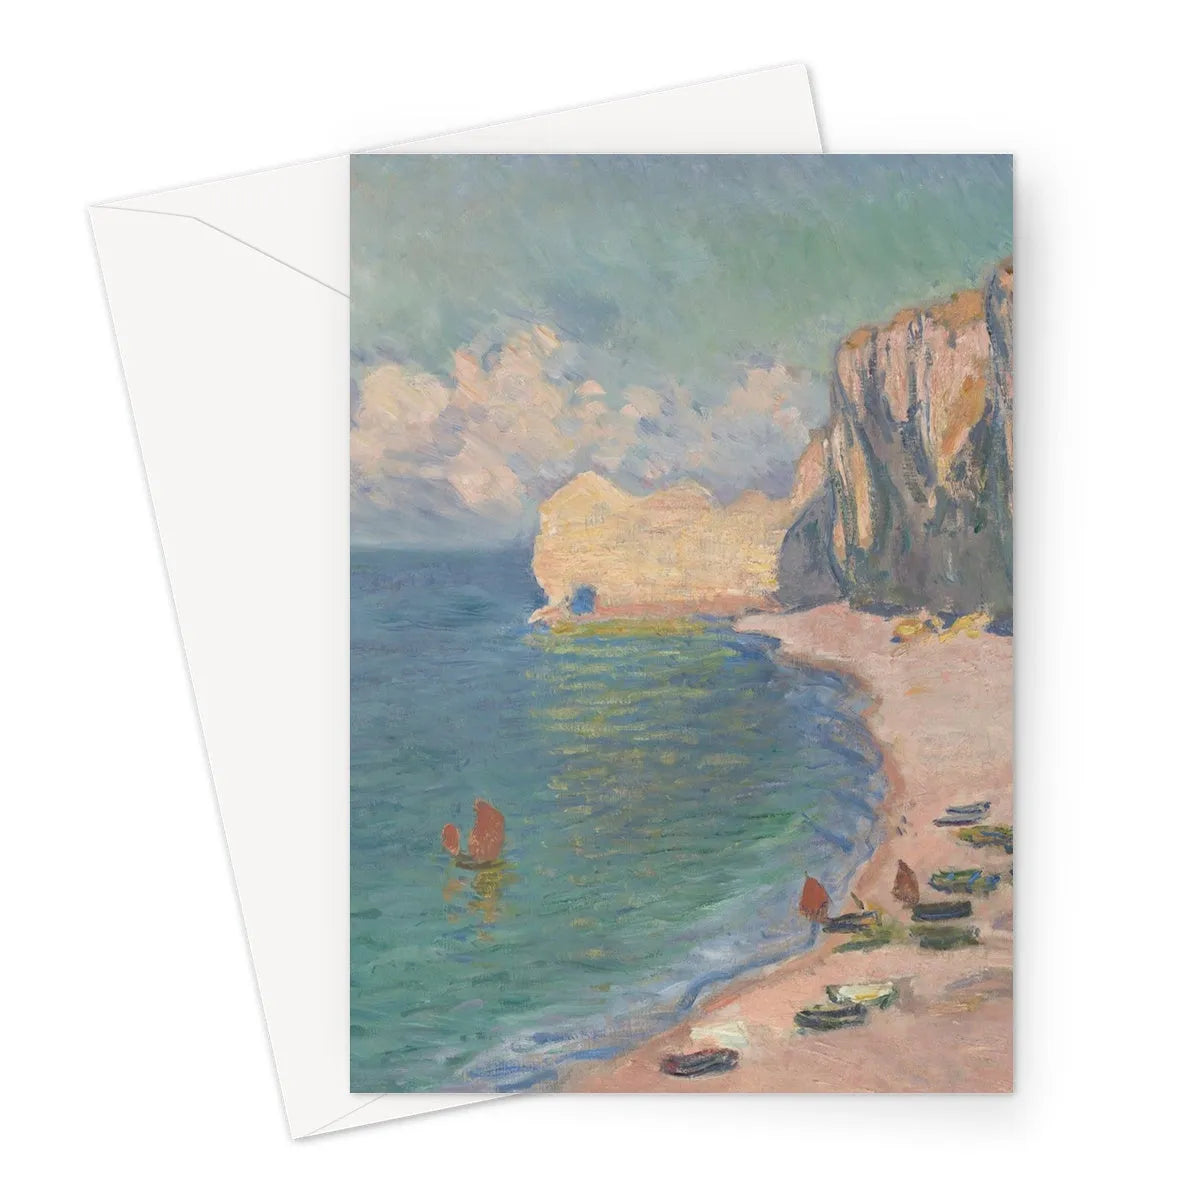 étretat By Claude Monet Greeting Card - A5 Portrait / 1 Card - Greeting & Note Cards - Aesthetic Art